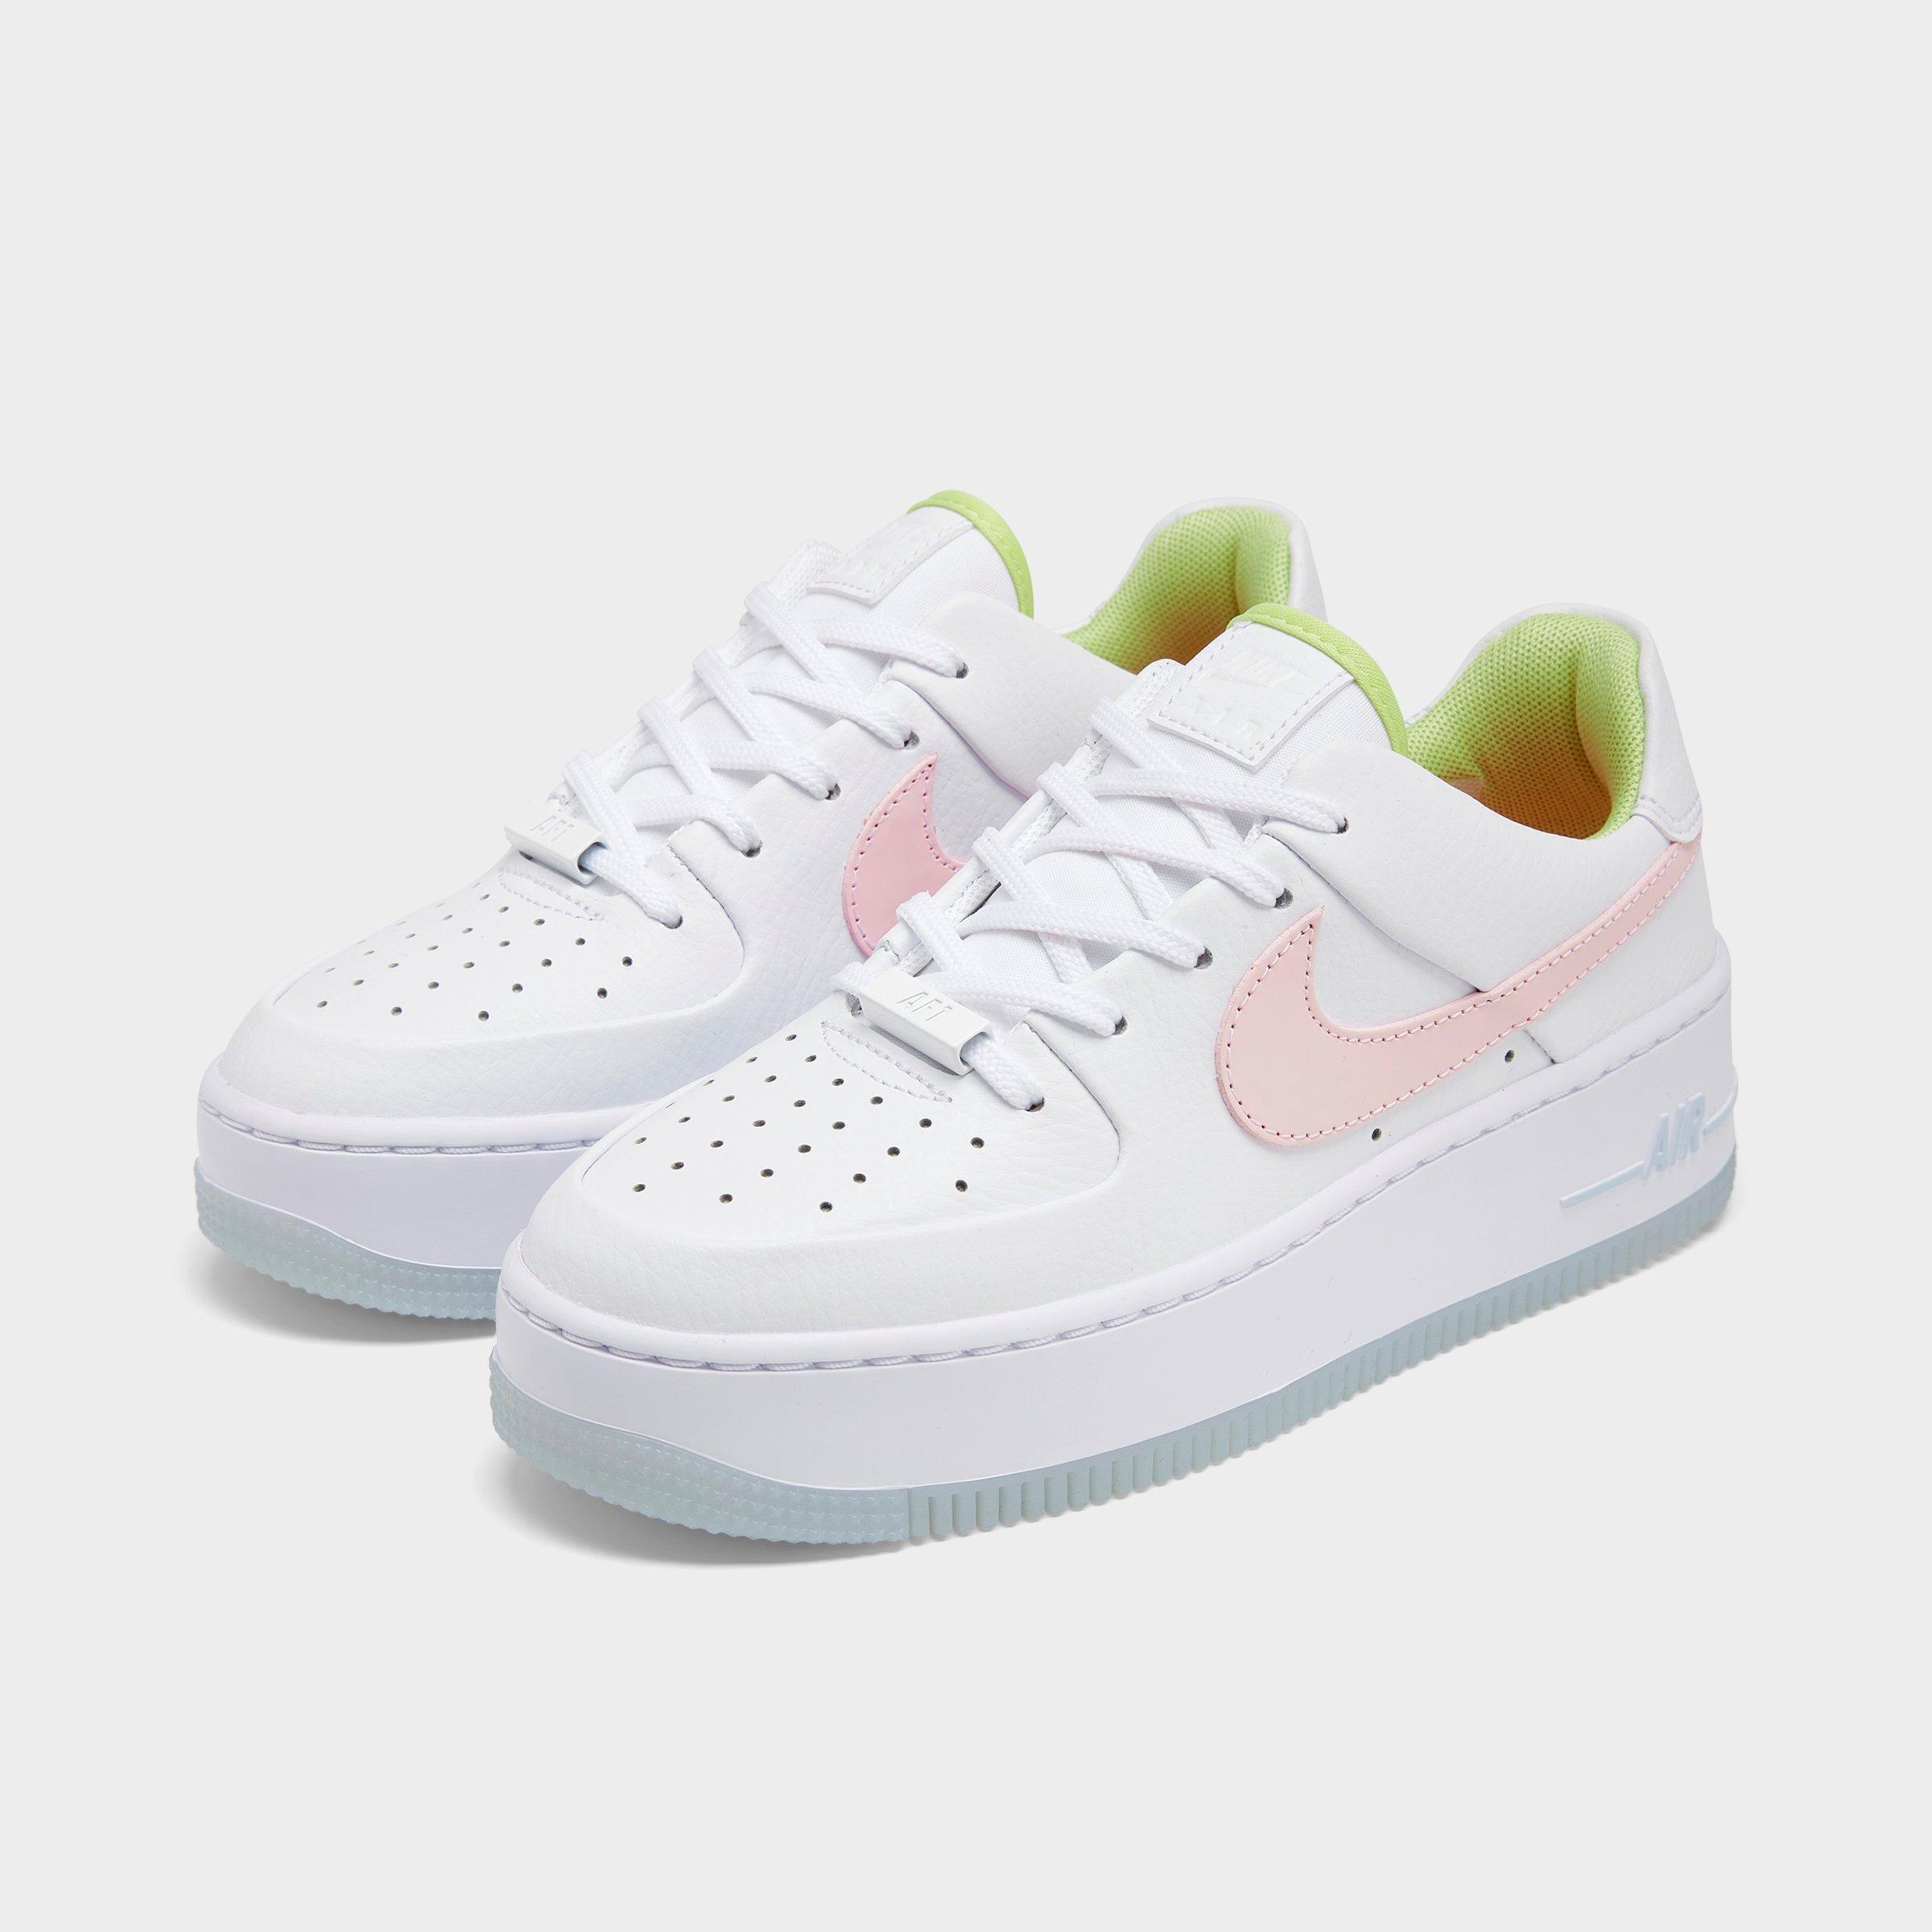 where can u buy air force ones